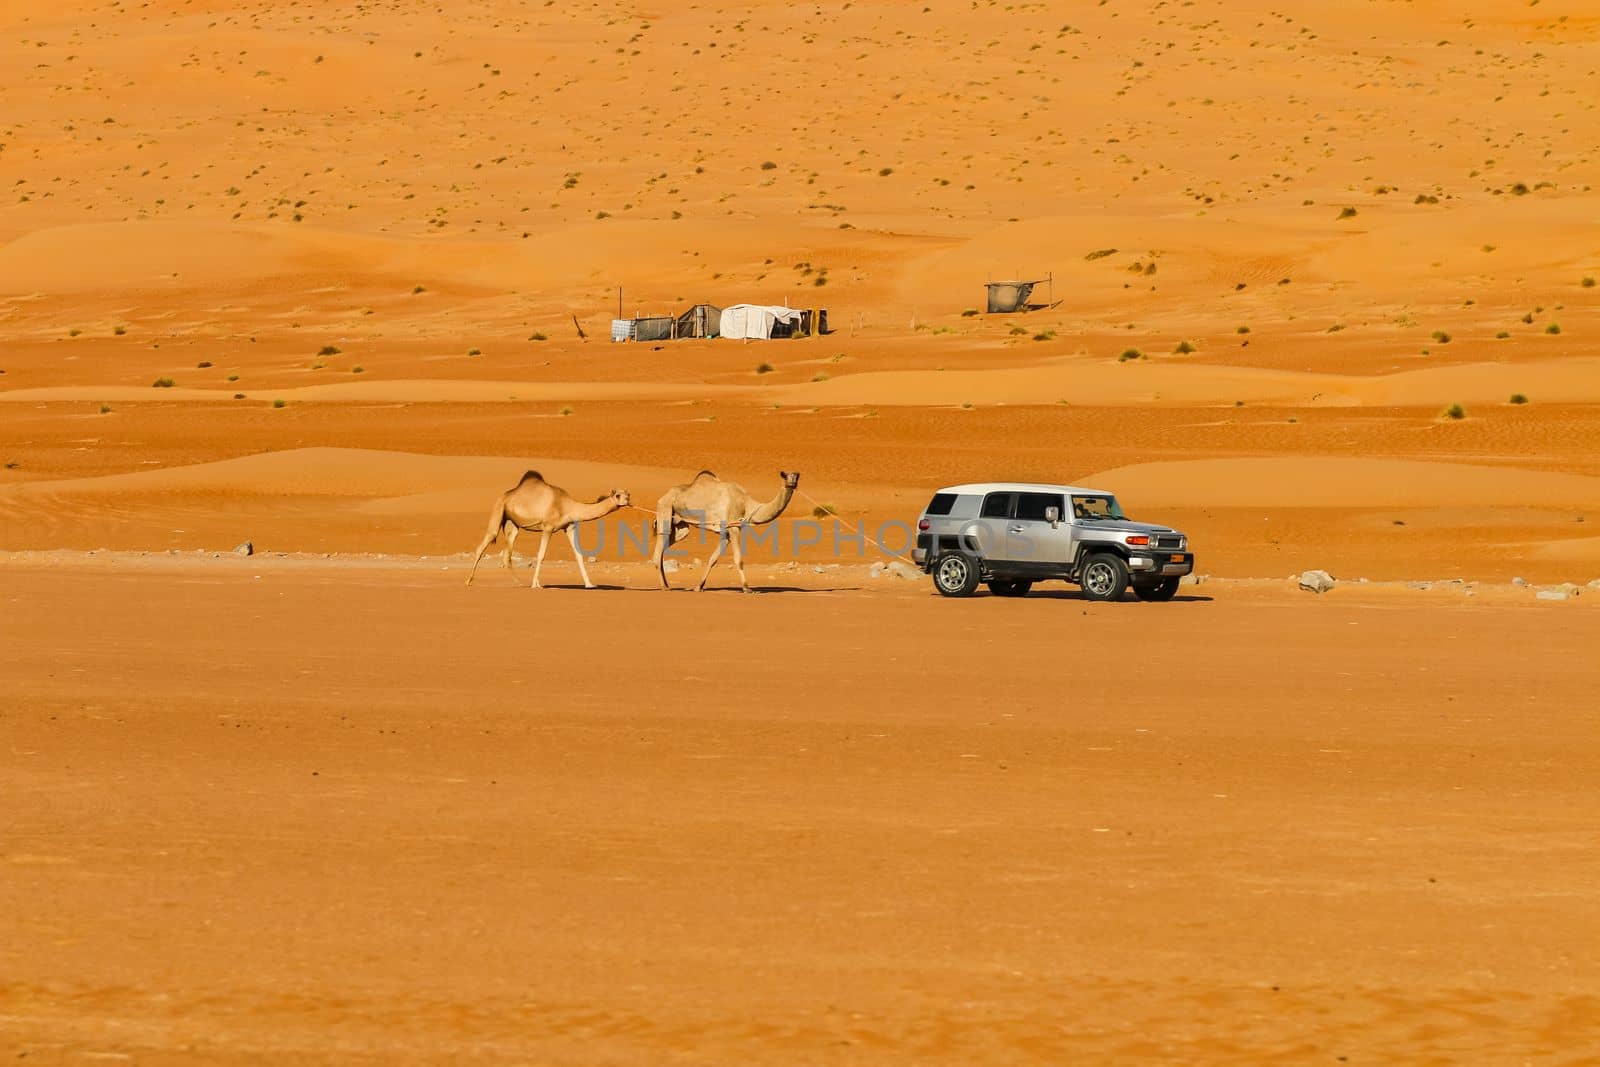 An all-terrain vehicle drives through the Wahiba Sands desert in Oman with two camels in tow